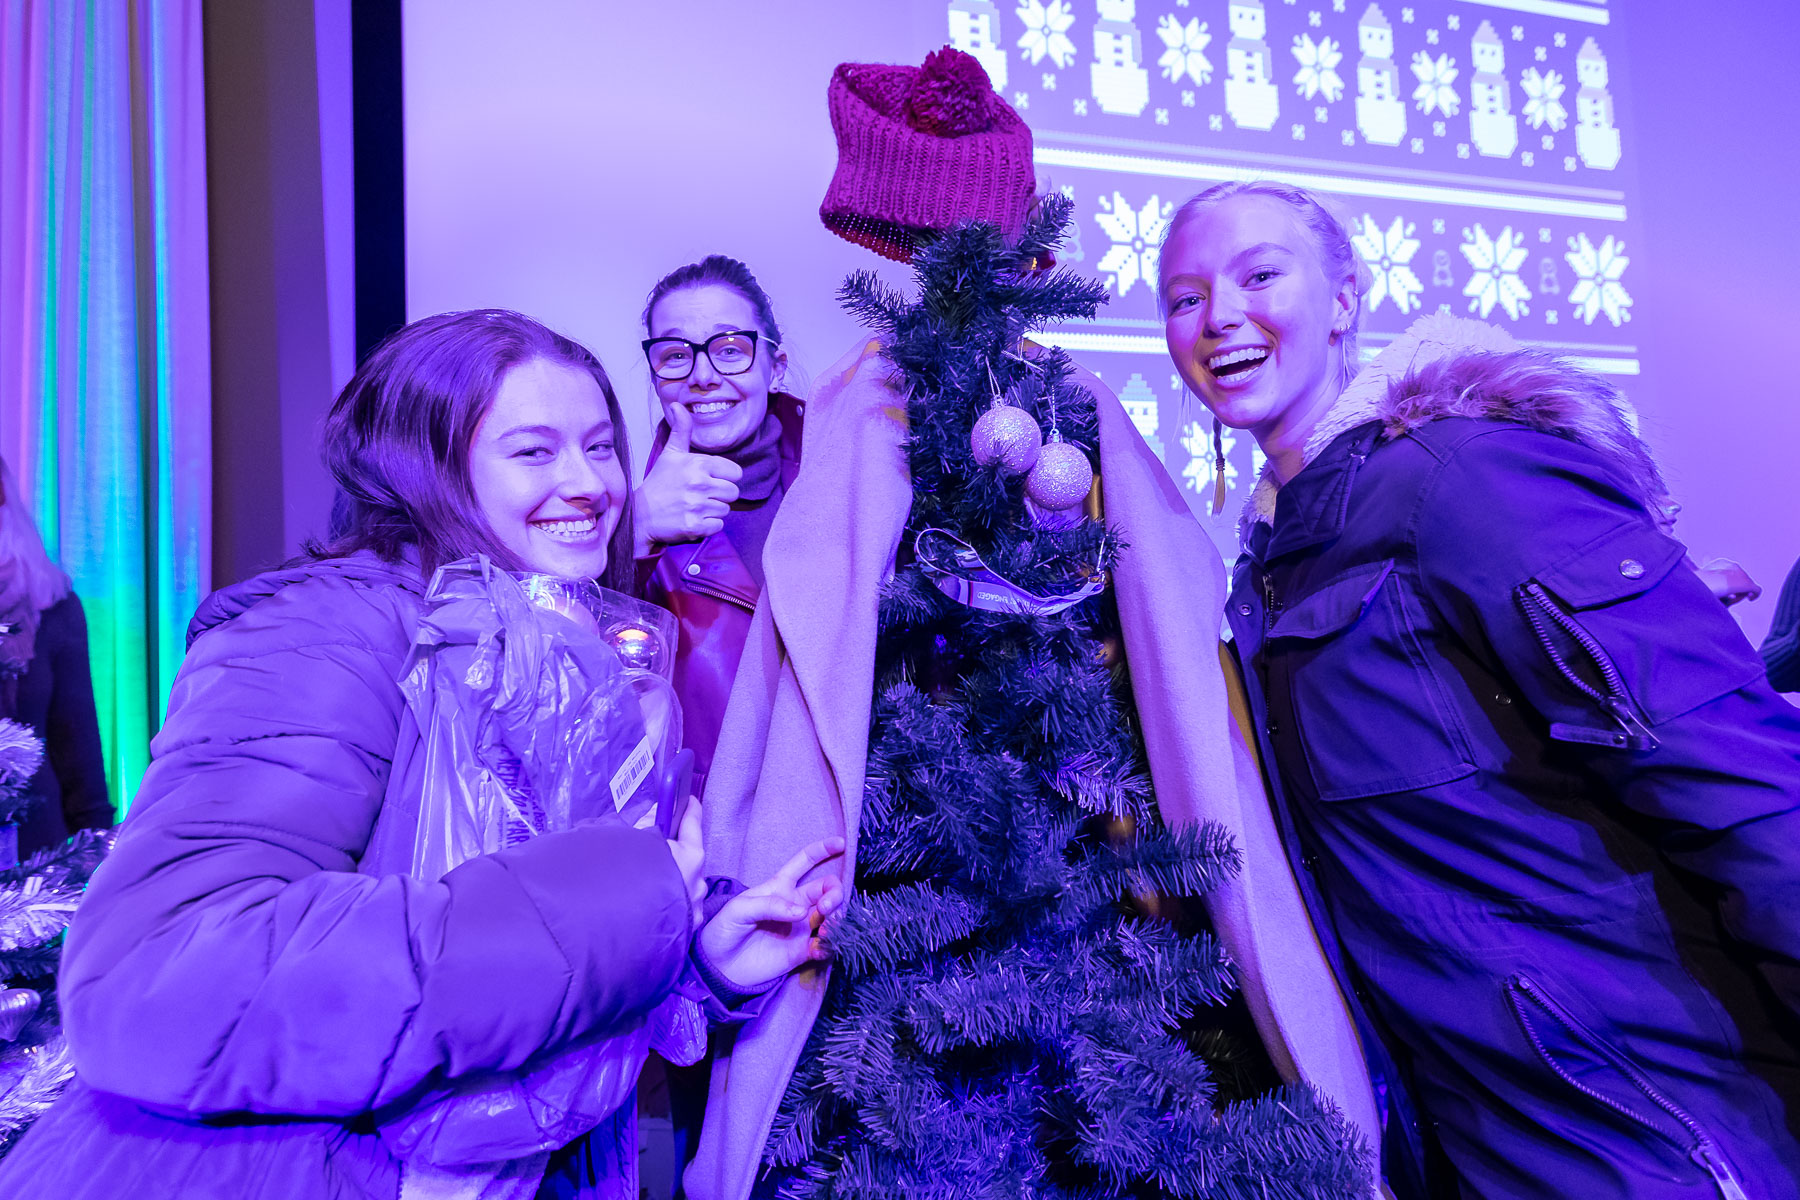 Students try their best to decorate a Christmas tree for the tree decorating contest at the Ugly Sweater Party. (DePaul University/Jeff Carrion)